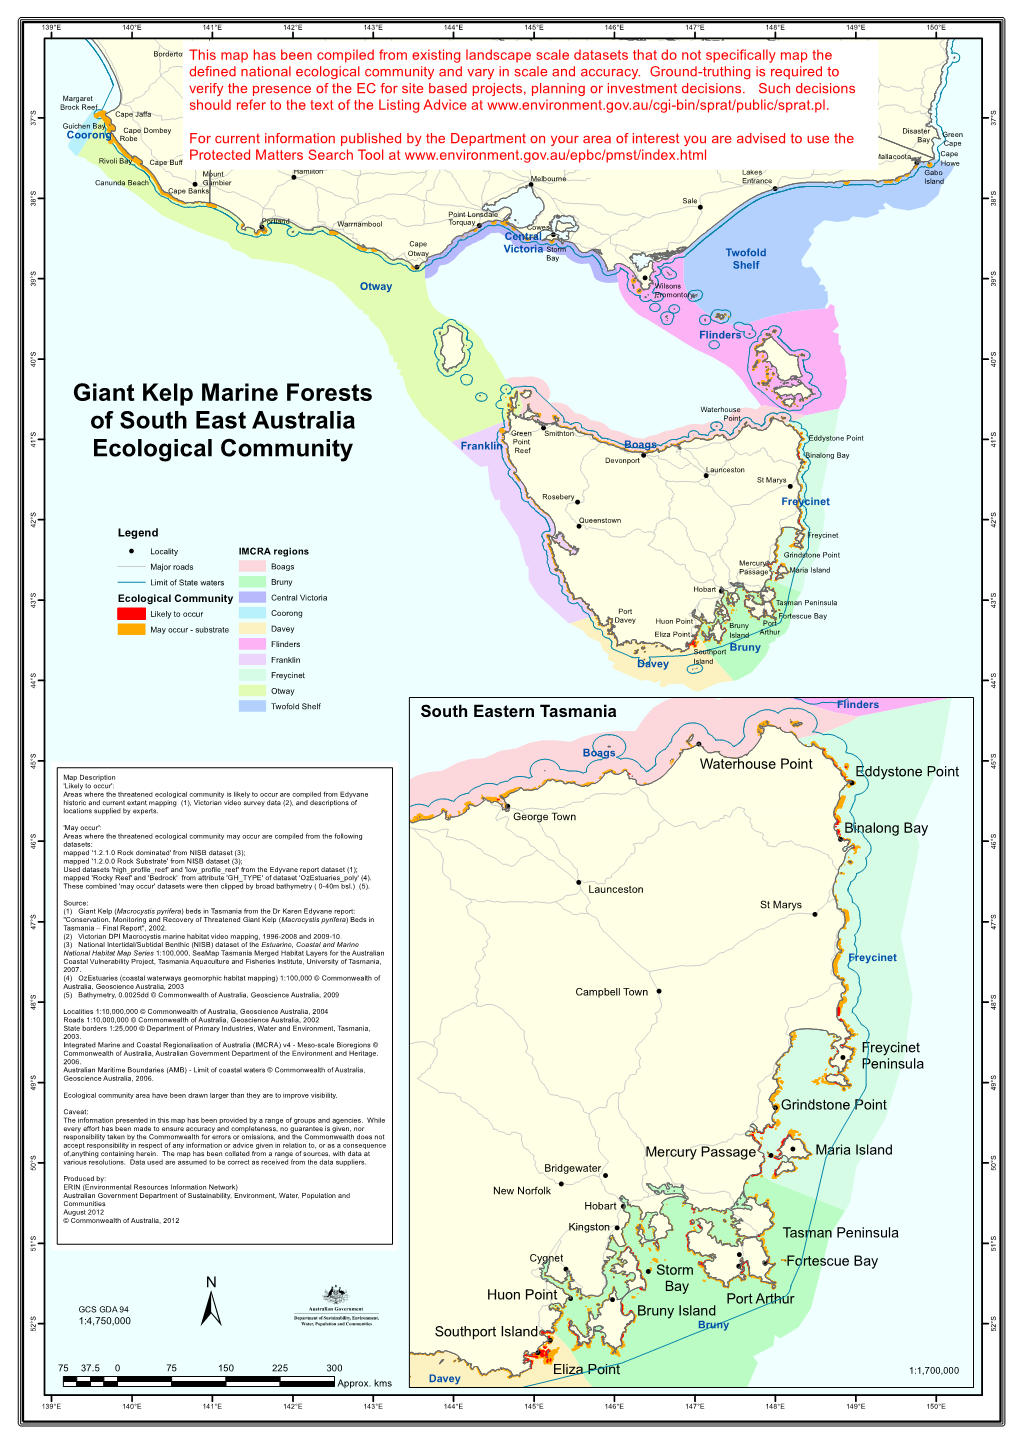 Map of Giant Kelp Marine Forests of South East Australia